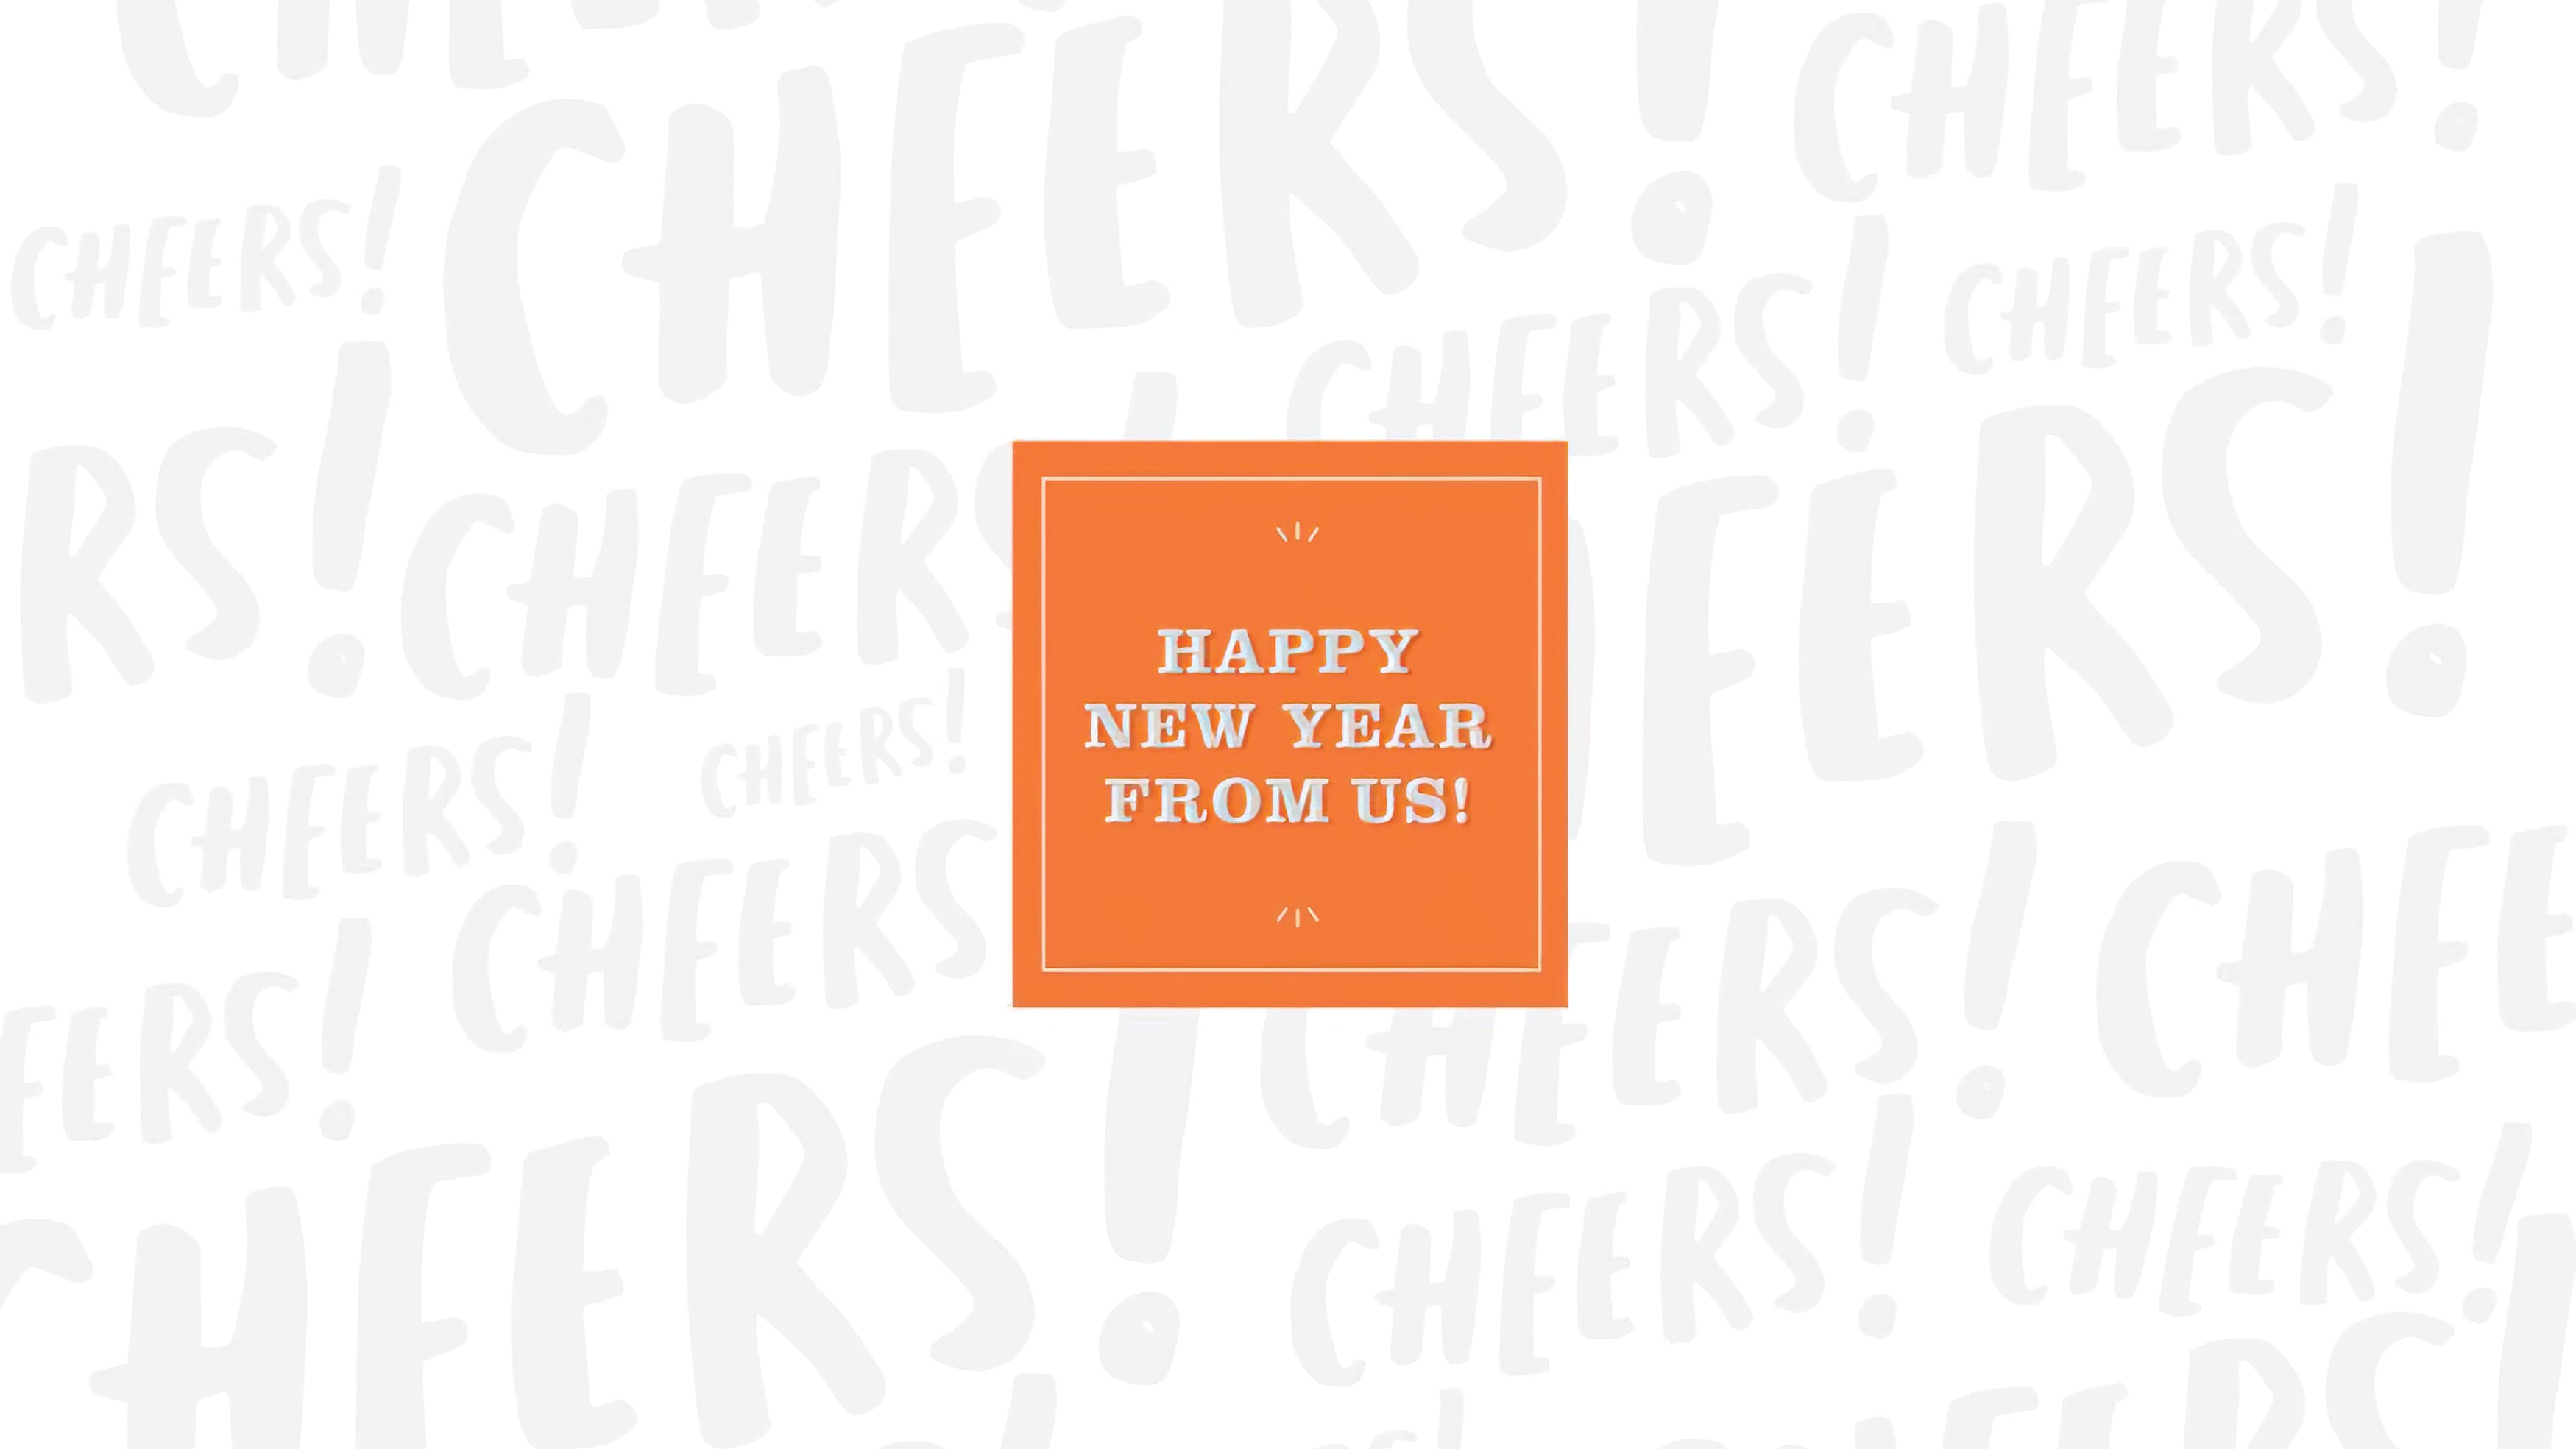 From the team at RSM Design, we wish you a happy New Years.